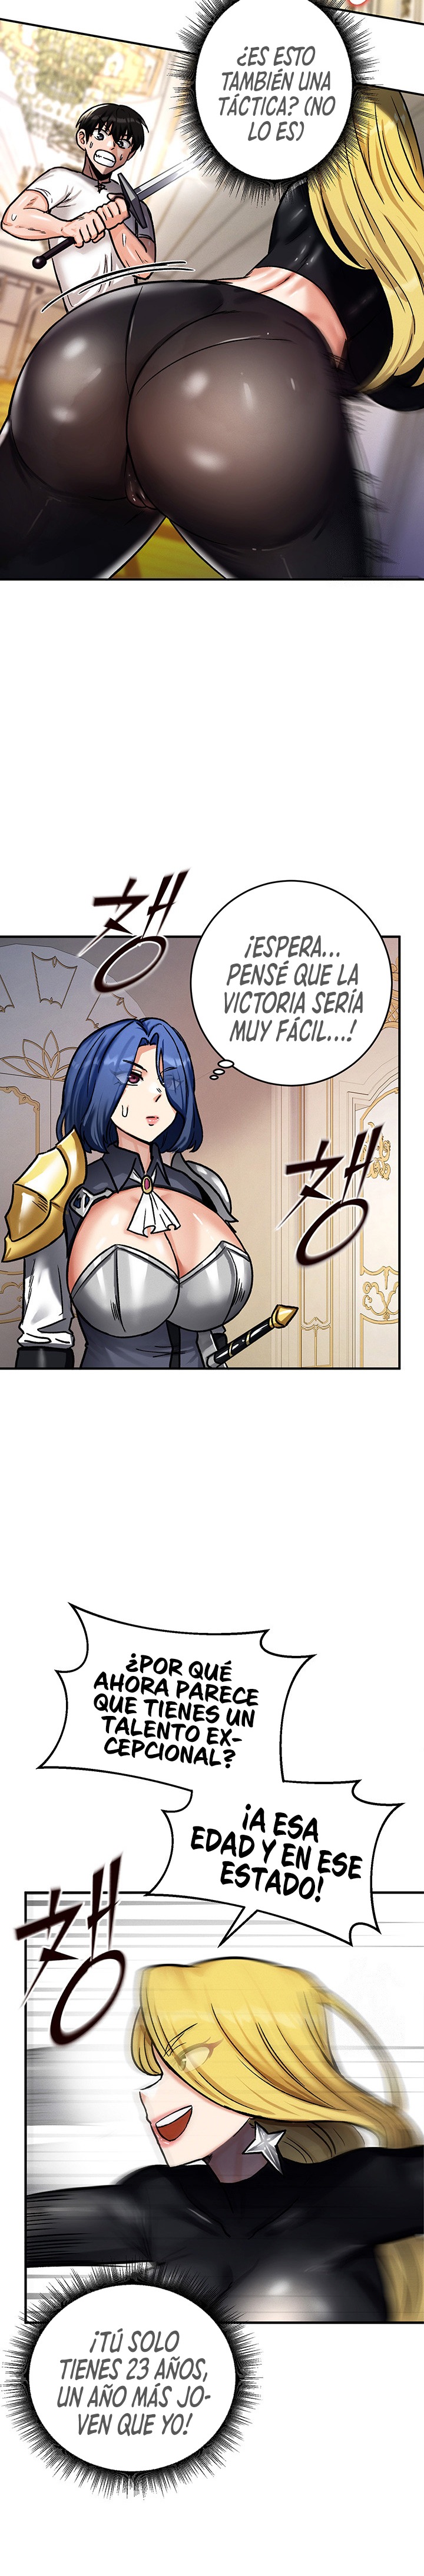 Regressed Warrior’s Female Dominance Raw - Chapter 8 Page 29